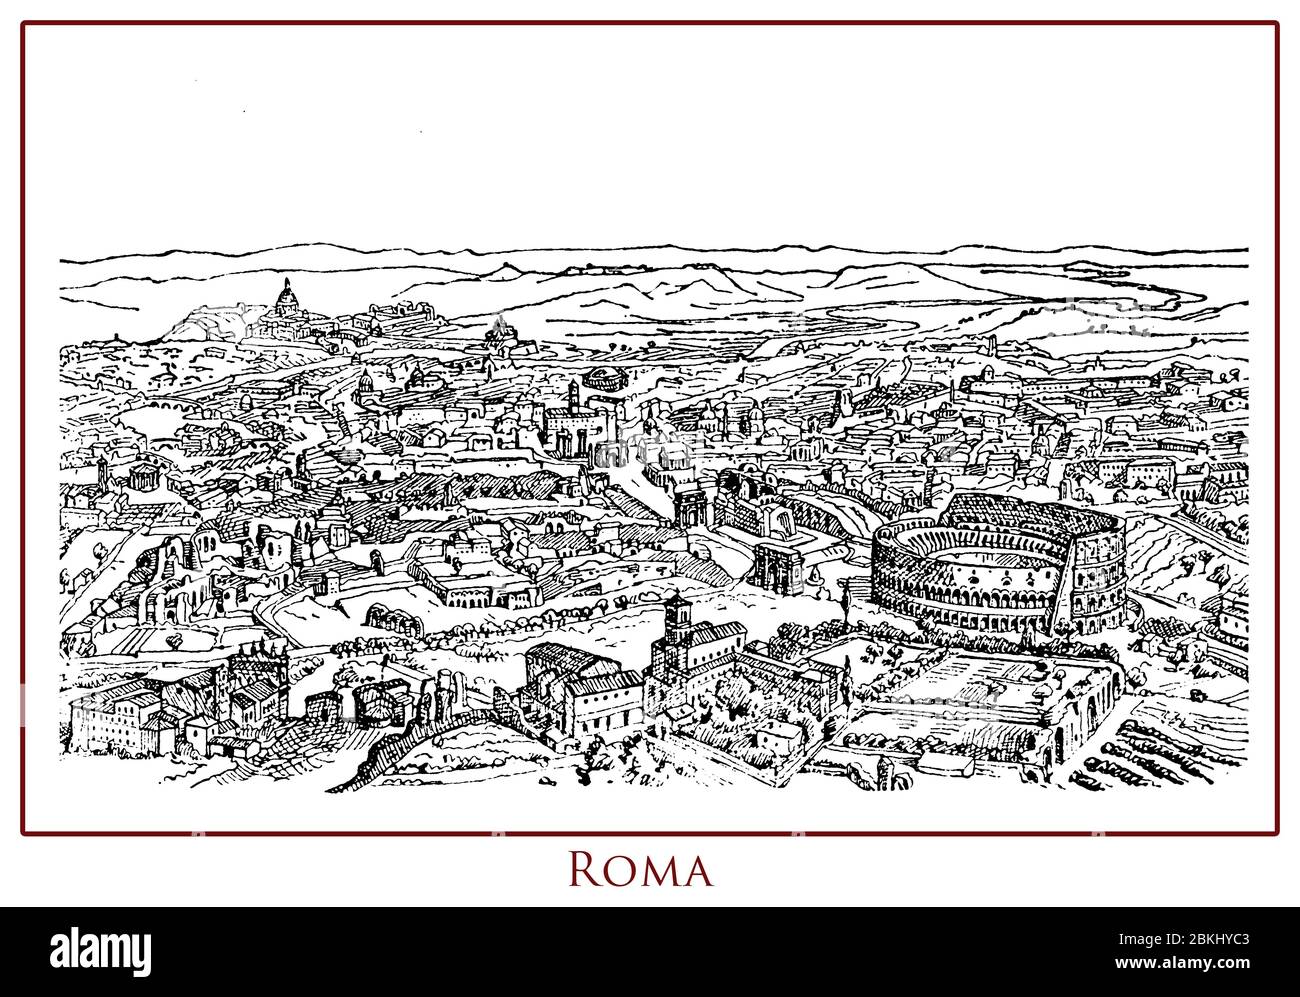 Vintage illustrated table with a panoramic view of the city of Rome capital of Italy situated on the Tiber river banks, rich of history, architecture,  art and ancient monuments like the Colosseum Stock Photo